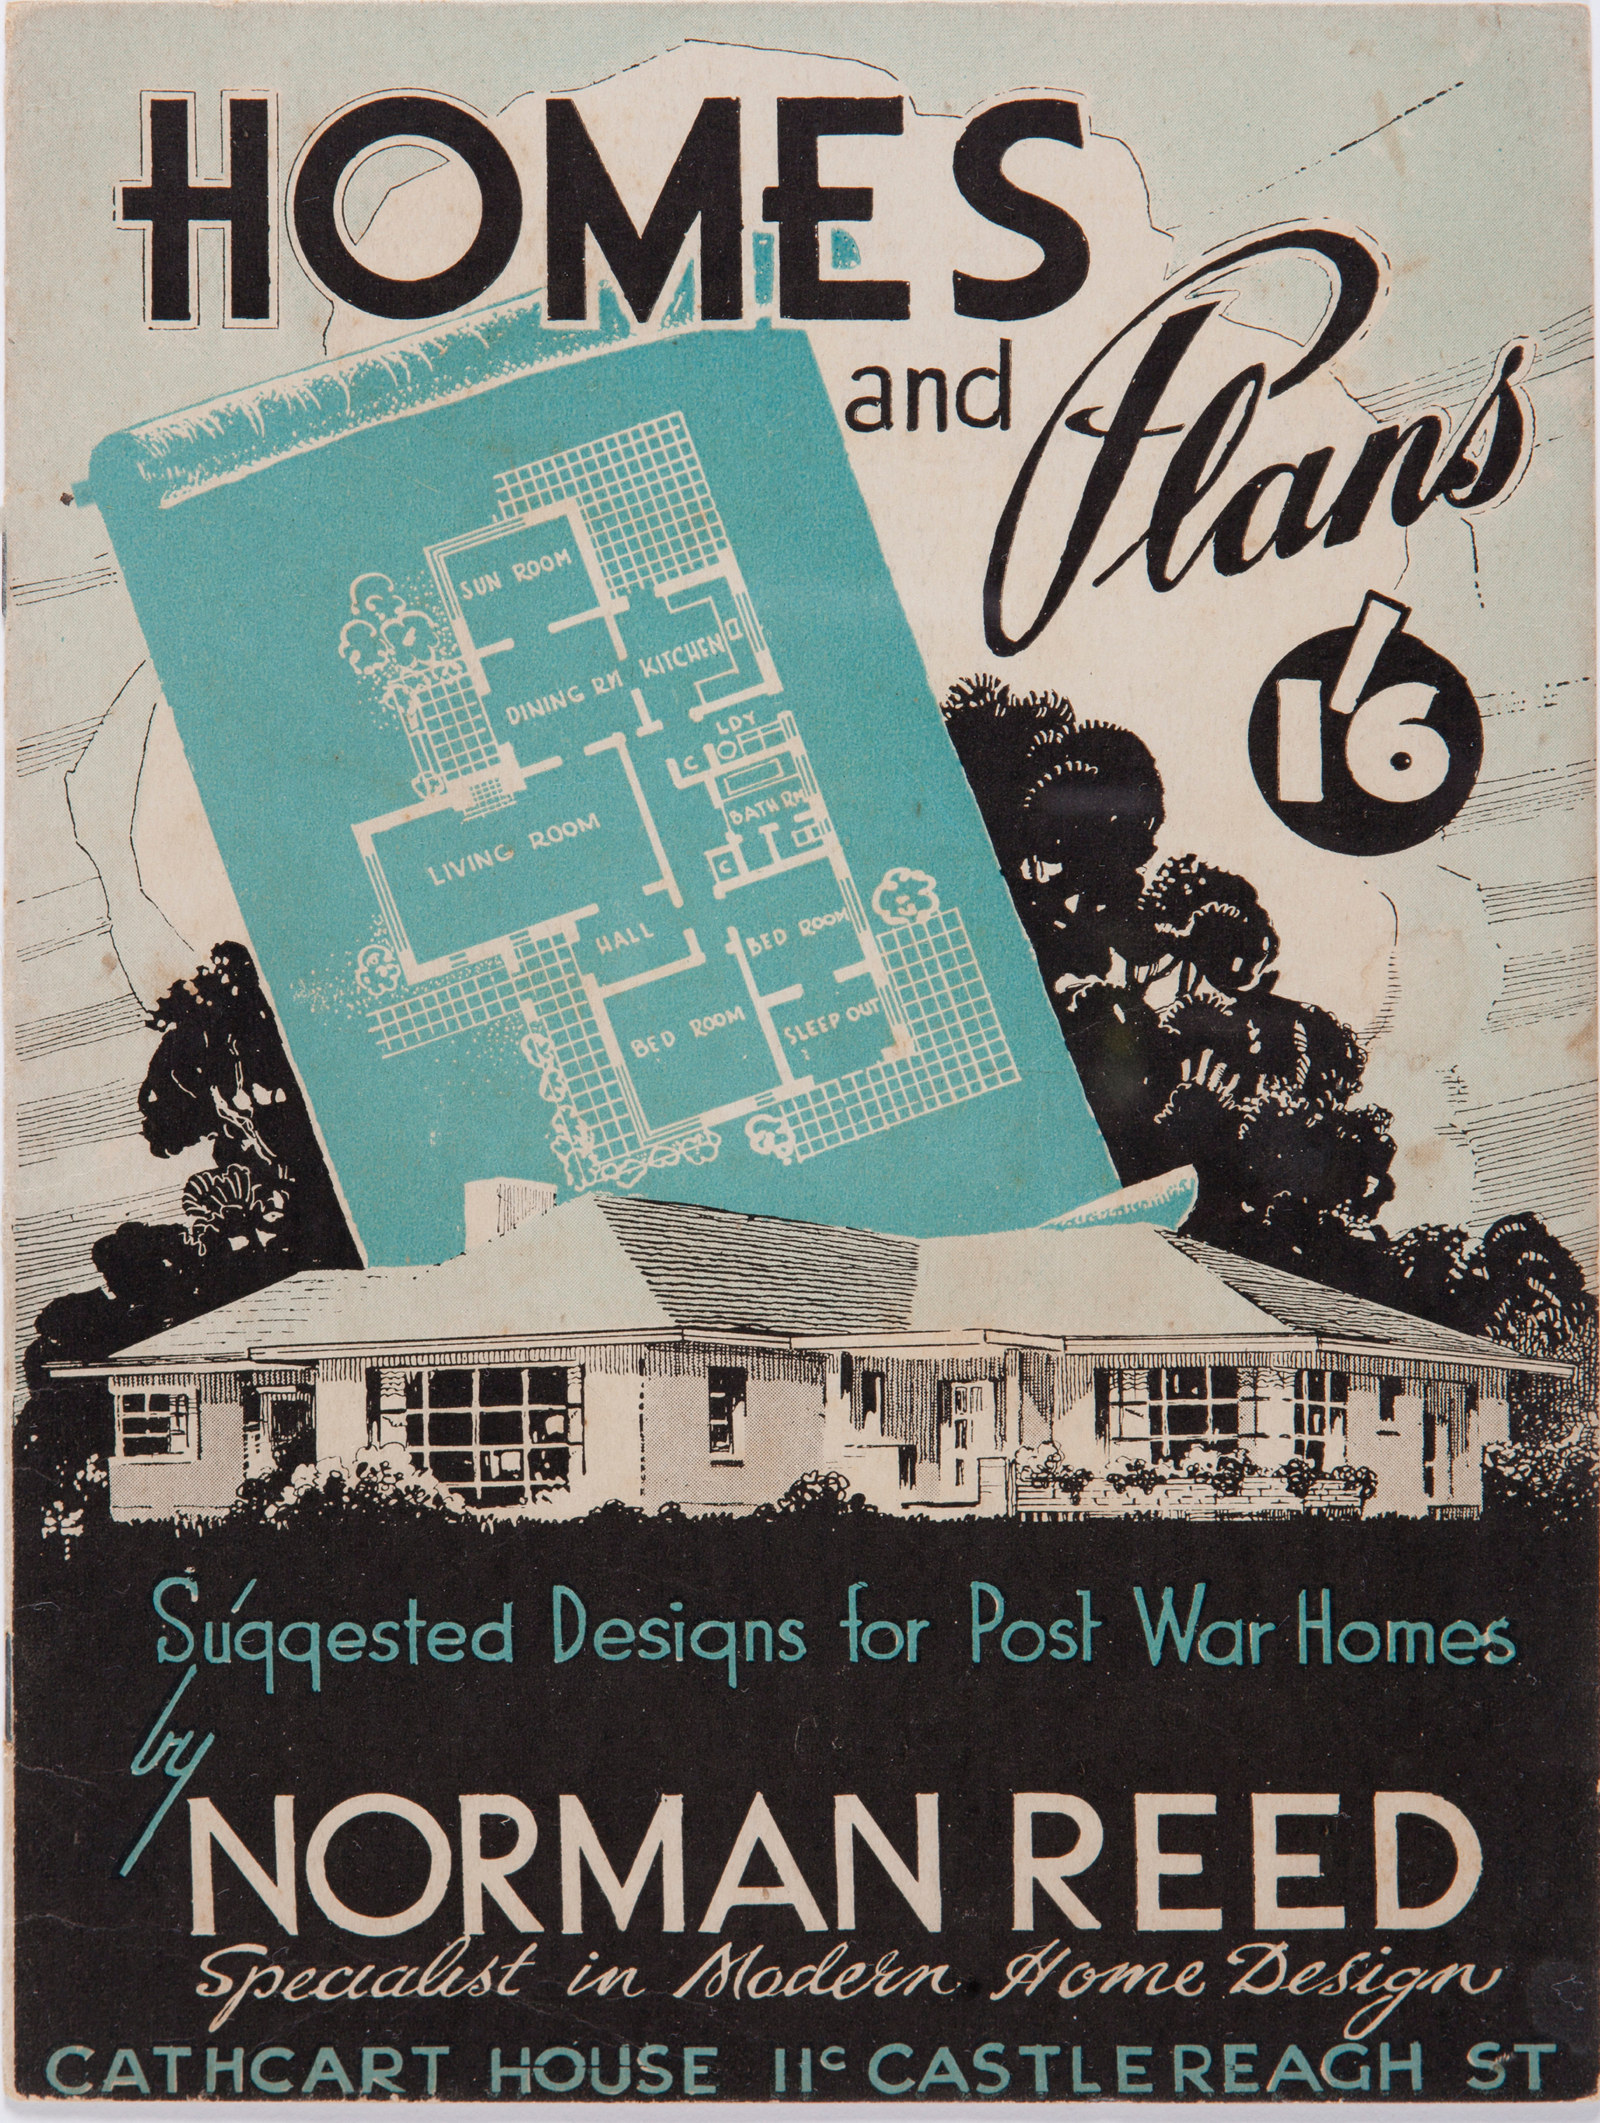 Cover of book, with drawing of house in white on black plus a white on green house plan superimposed.